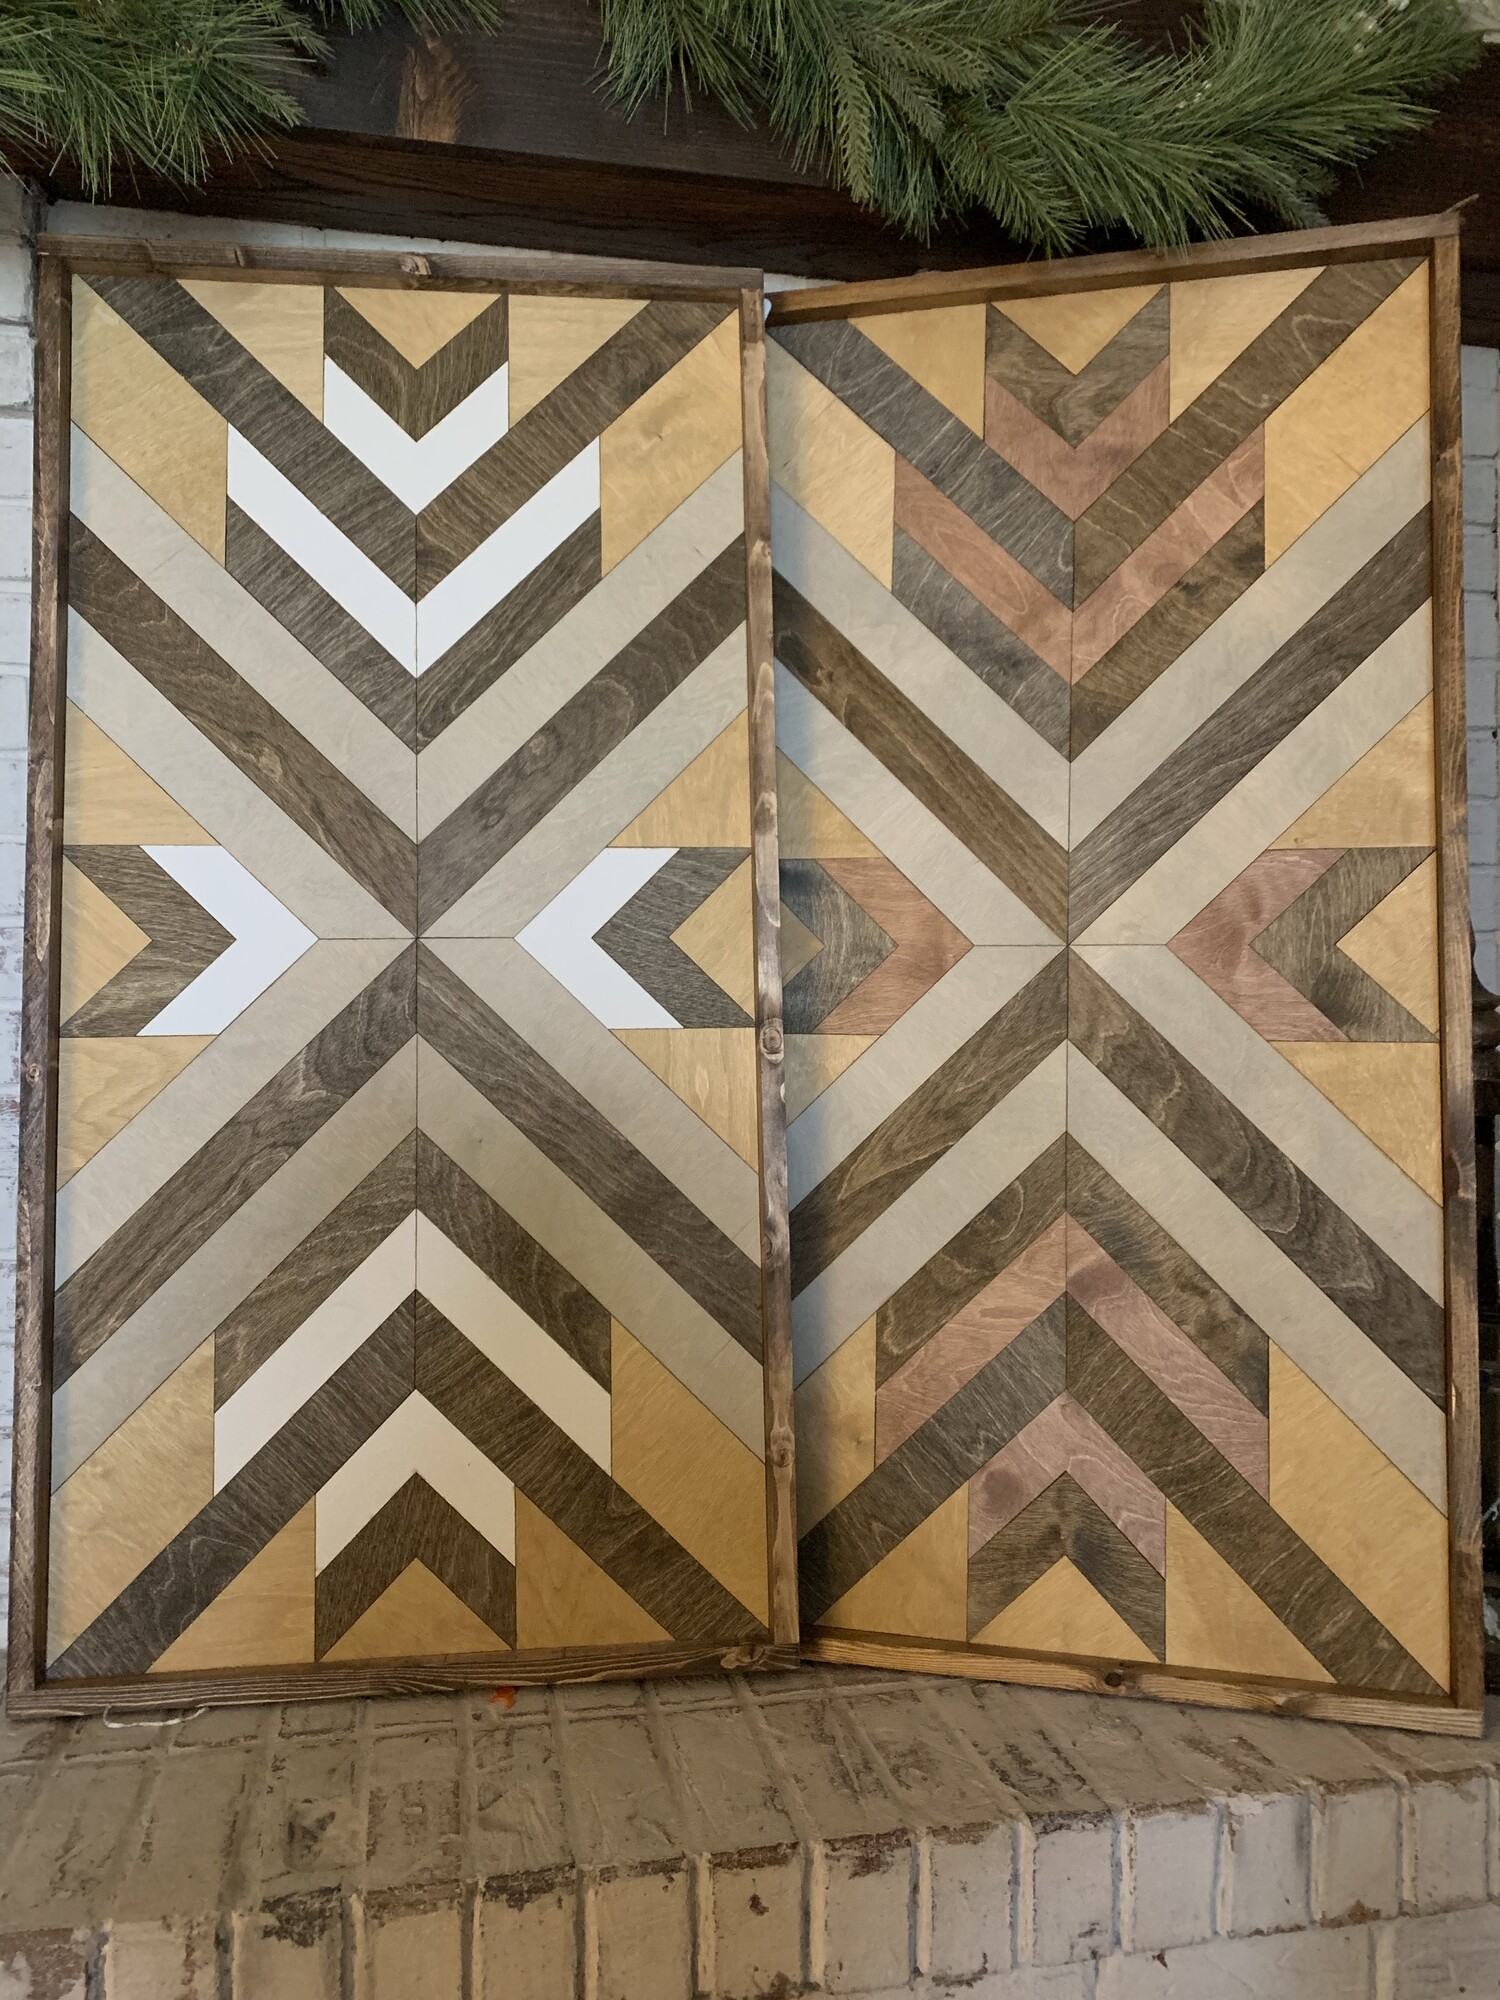 Wood stain and yellow painted geometrical wall decor